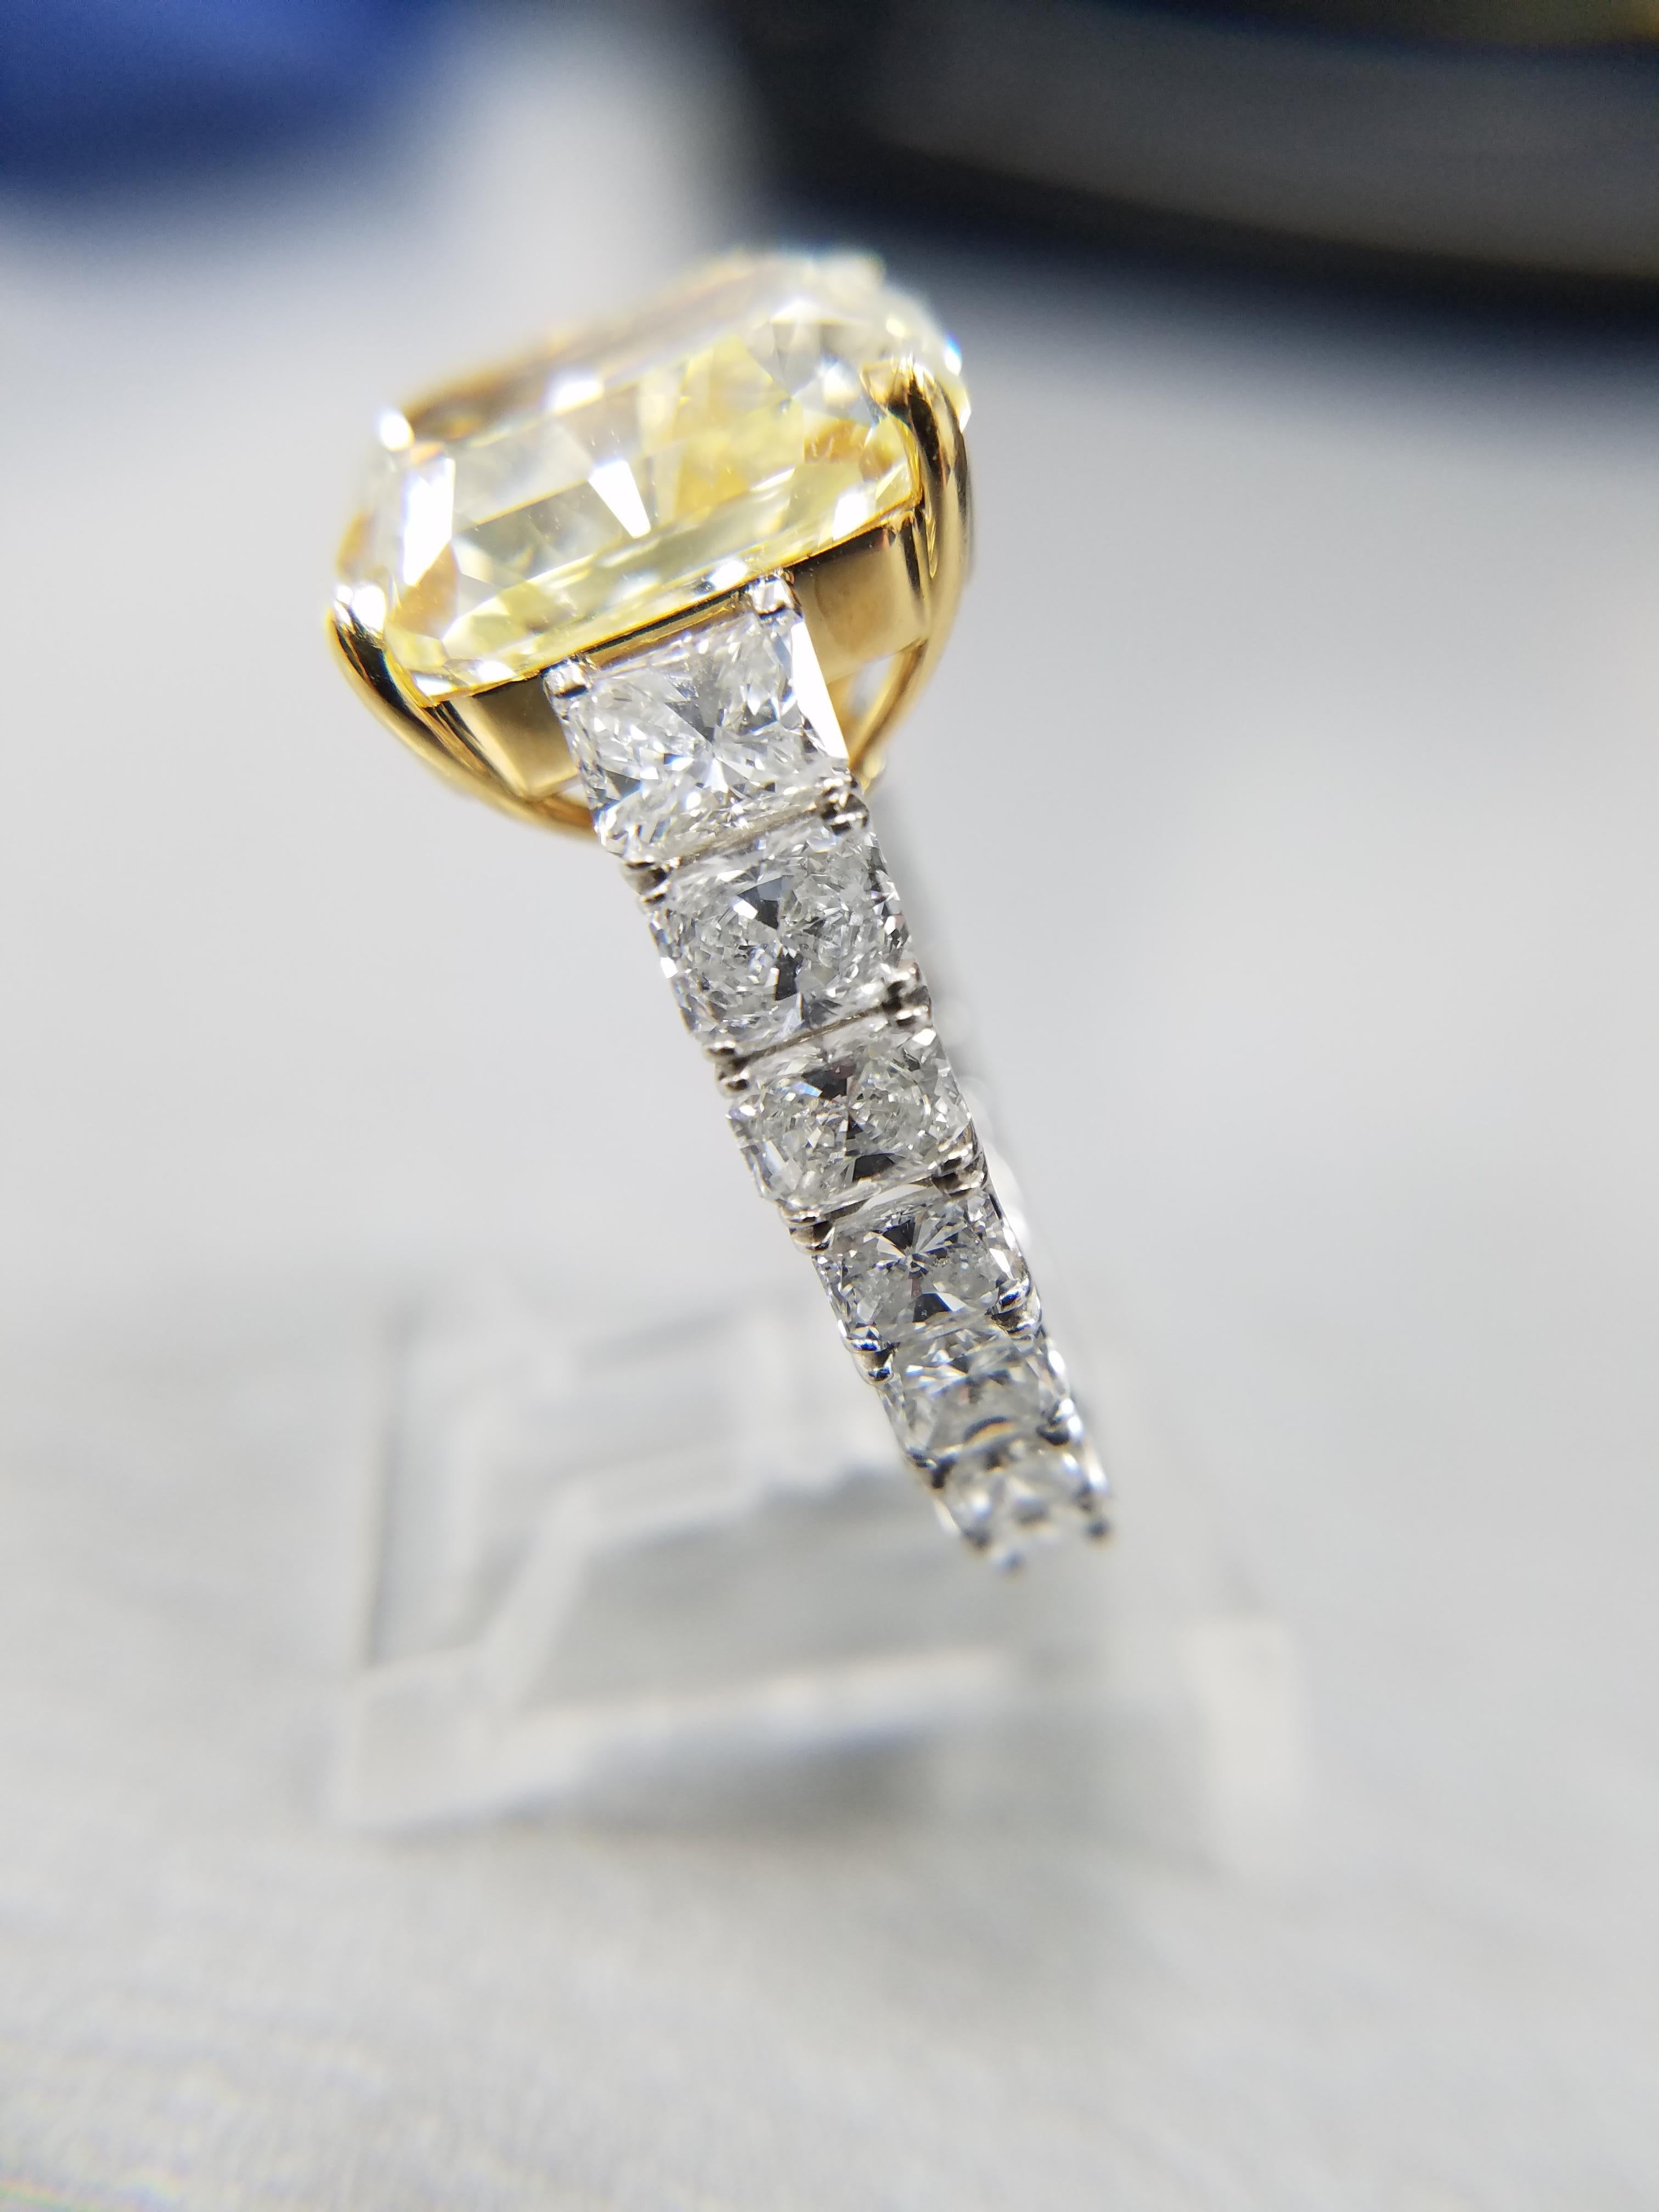 GIA Certified 12.50 ct Natural Fancy Yellow Radiant Diamond Ring. The setting is Platinum and Yellow Gold with 14 Radiant cut diamonds on the sides totaling 4.21 carats. This ring is one of our original Louis Newman & Co creations designed by